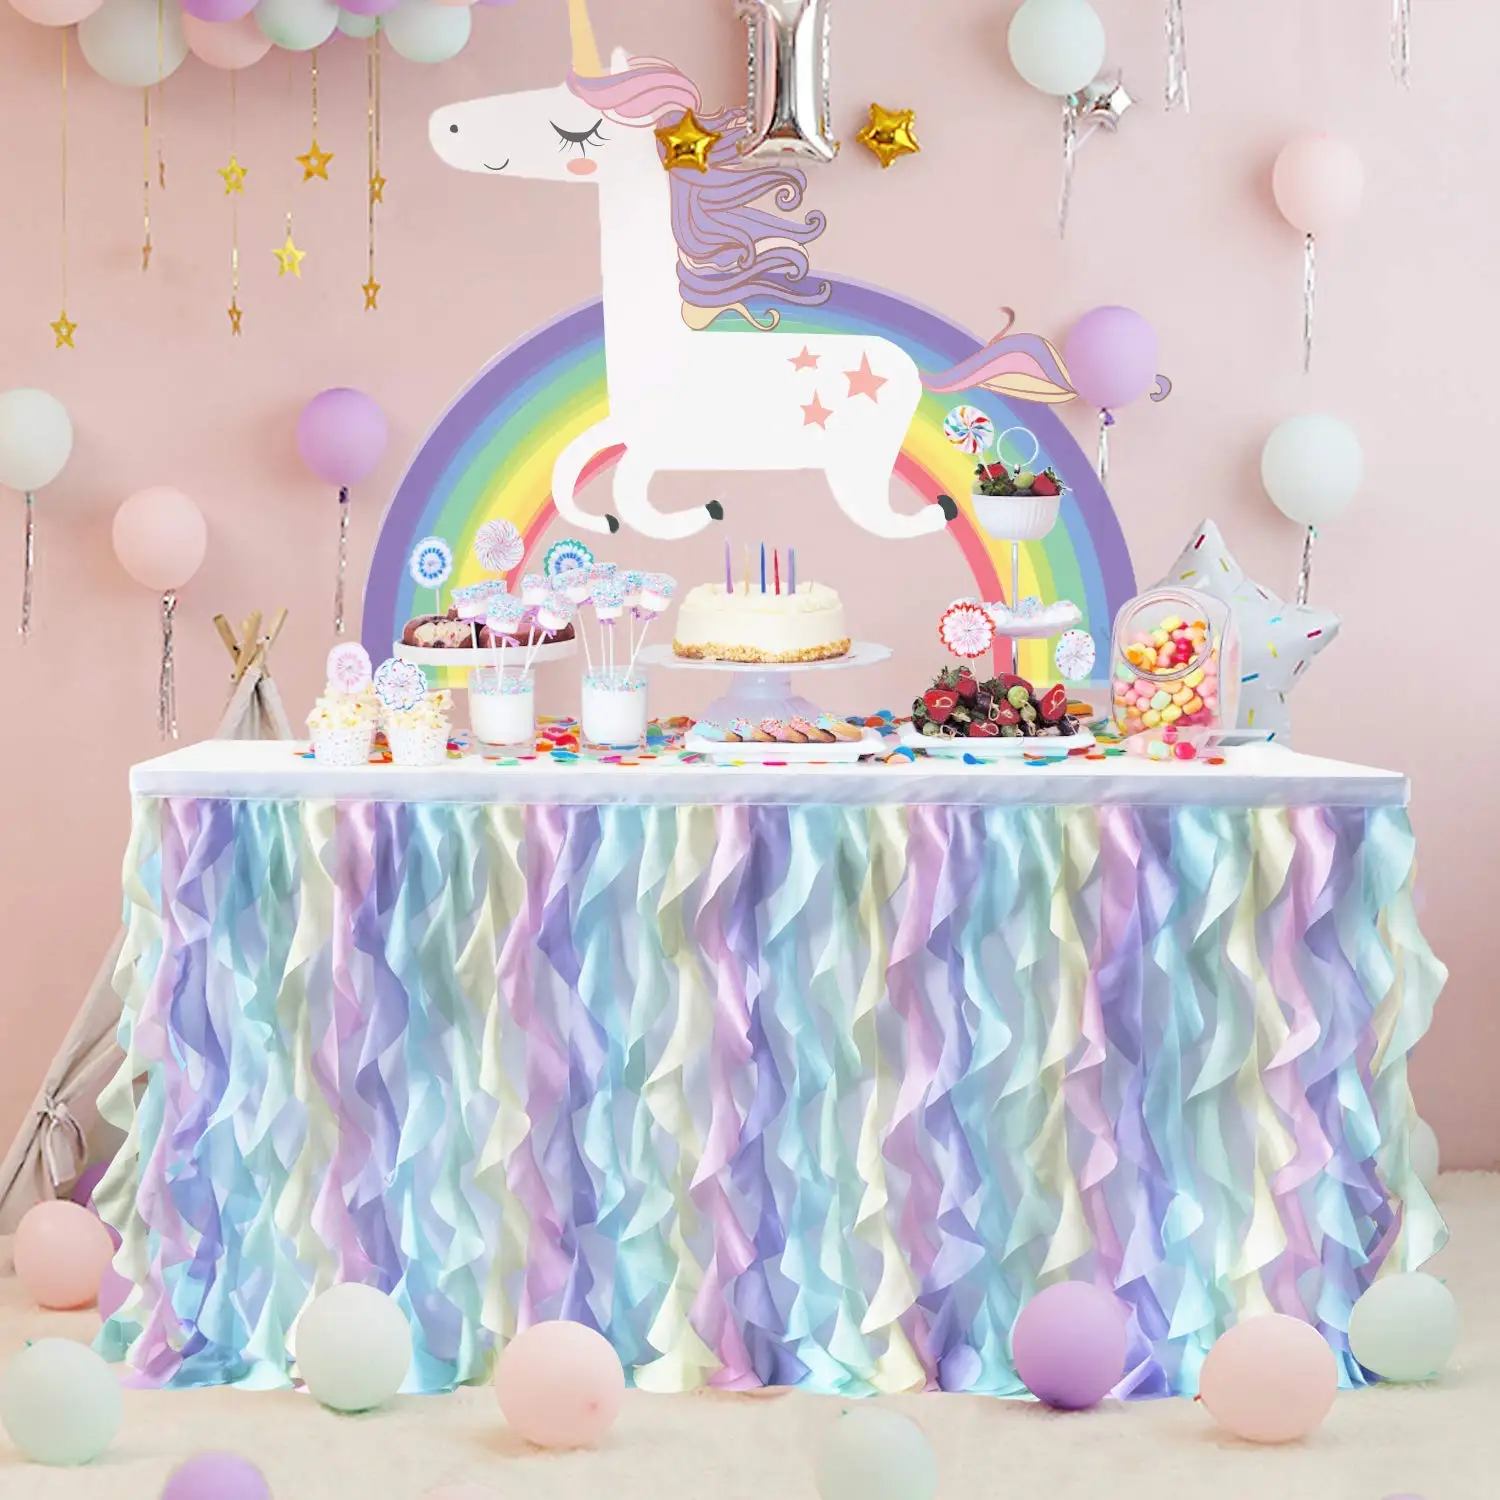 * H 30in Rainbow, L 6 KIXIGO Rainbow Curly Willow Tutu Table Skirt Ruffle Tablecloth for Baby Shower Unicorn Party Decorations ft